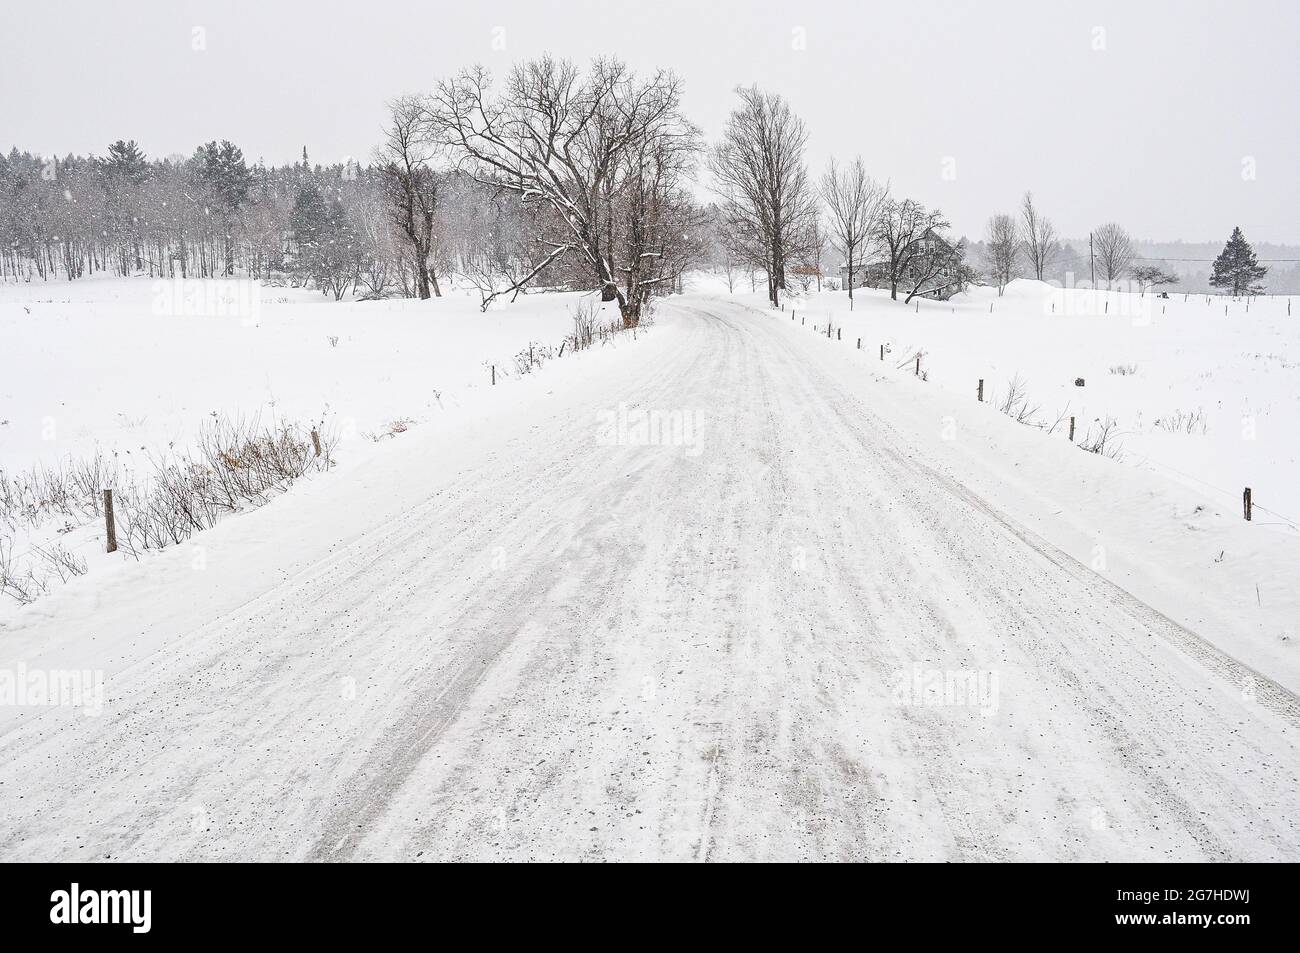 Snowy, rural road in East Montpelier, Vermont, USA. Stock Photo